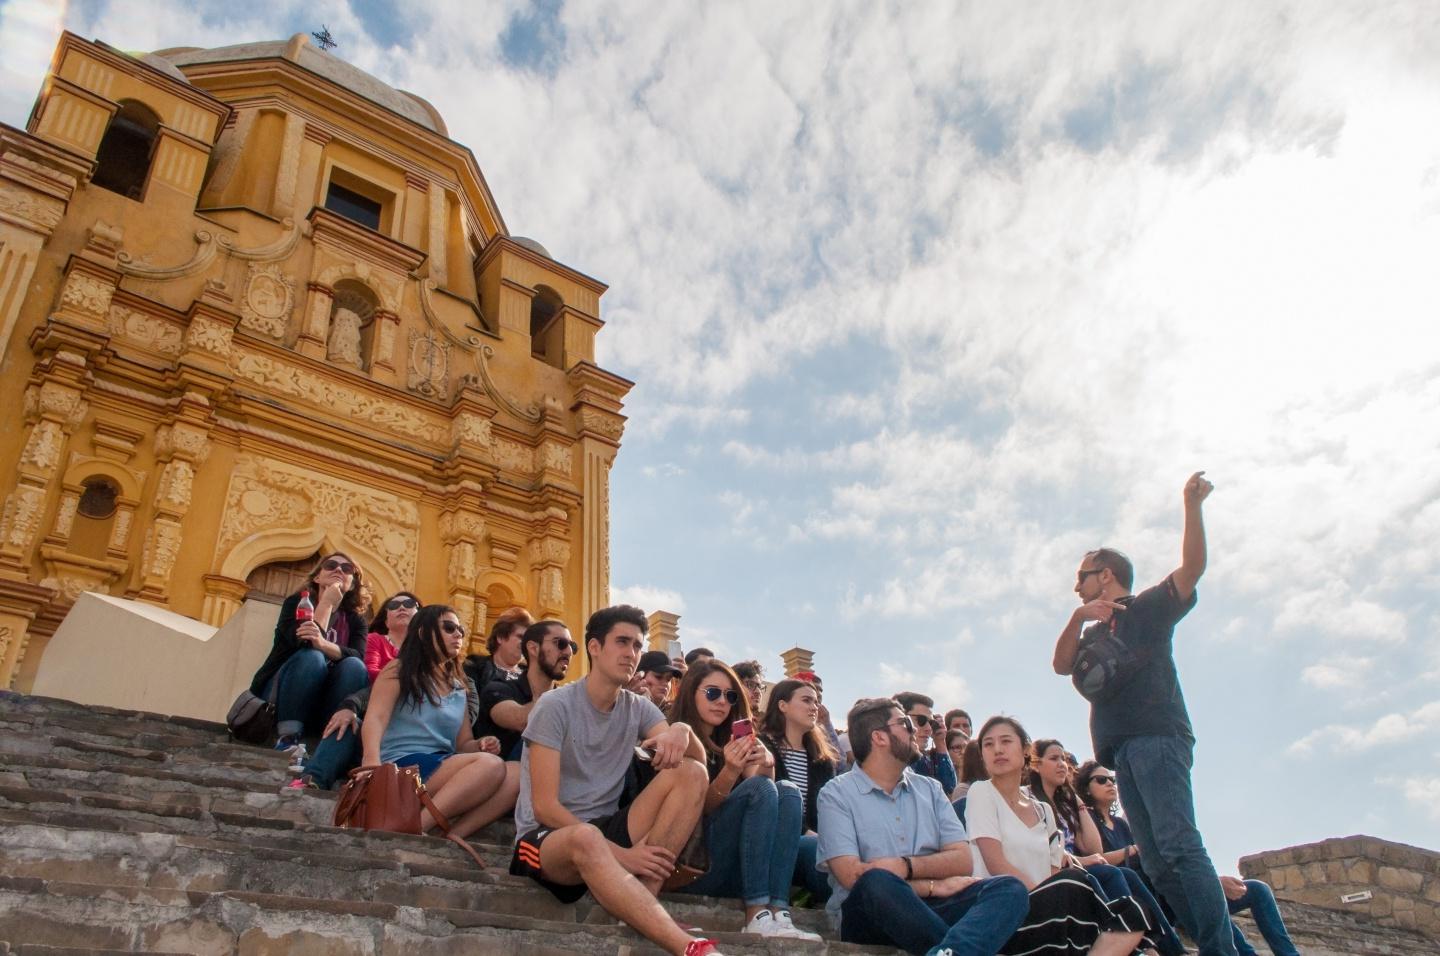 Students take part in a class on cathedral steps in Monterrey, Mexico